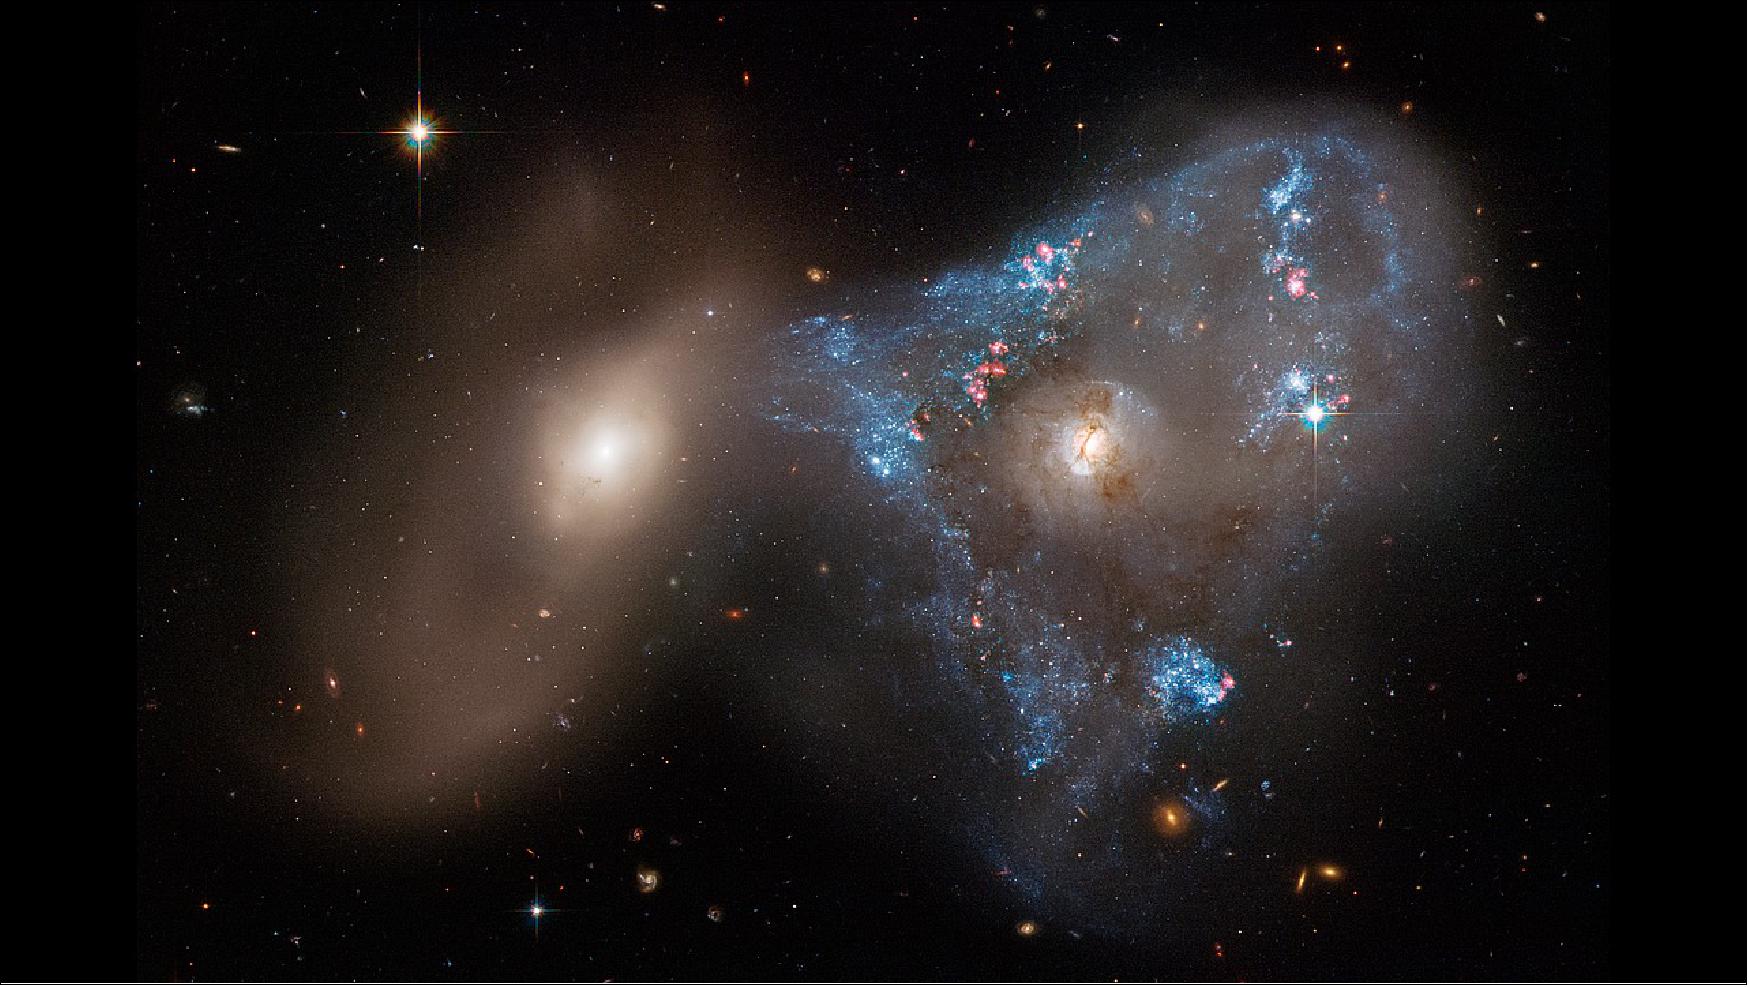 Figure 71: A spectacular head-on collision between two galaxies fueled the unusual triangular-shaped star-birthing frenzy, as captured in a new image from NASA's Hubble Space Telescope. The interacting galaxy duo is collectively called Arp 143. The pair contains the glittery, distorted, star-forming spiral galaxy NGC 2445 at right, along with its less flashy companion, NGC 2444 at left. — Astronomers suggest that the galaxies passed through each other, igniting the uniquely shaped star-formation firestorm in NGC 2445, where thousands of stars are bursting to life on the right-hand side of the image. This galaxy is awash in starbirth because it is rich in gas, the fuel that makes stars. However, it hasn't yet escaped the gravitational clutches of its partner NGC 2444, shown on the left side of the image. The pair is waging a cosmic tug-of-war, which NGC 2444 appears to be winning. The galaxy has pulled gas from NGC 2445, forming the oddball triangle of newly minted stars[Credits: Image: NASA, ESA, STScI, Julianne Dalcanton Center for Computational Astrophysics, Flatiron Inst. / U. Washington); Image processing: Joseph DePasquale (STScI)]